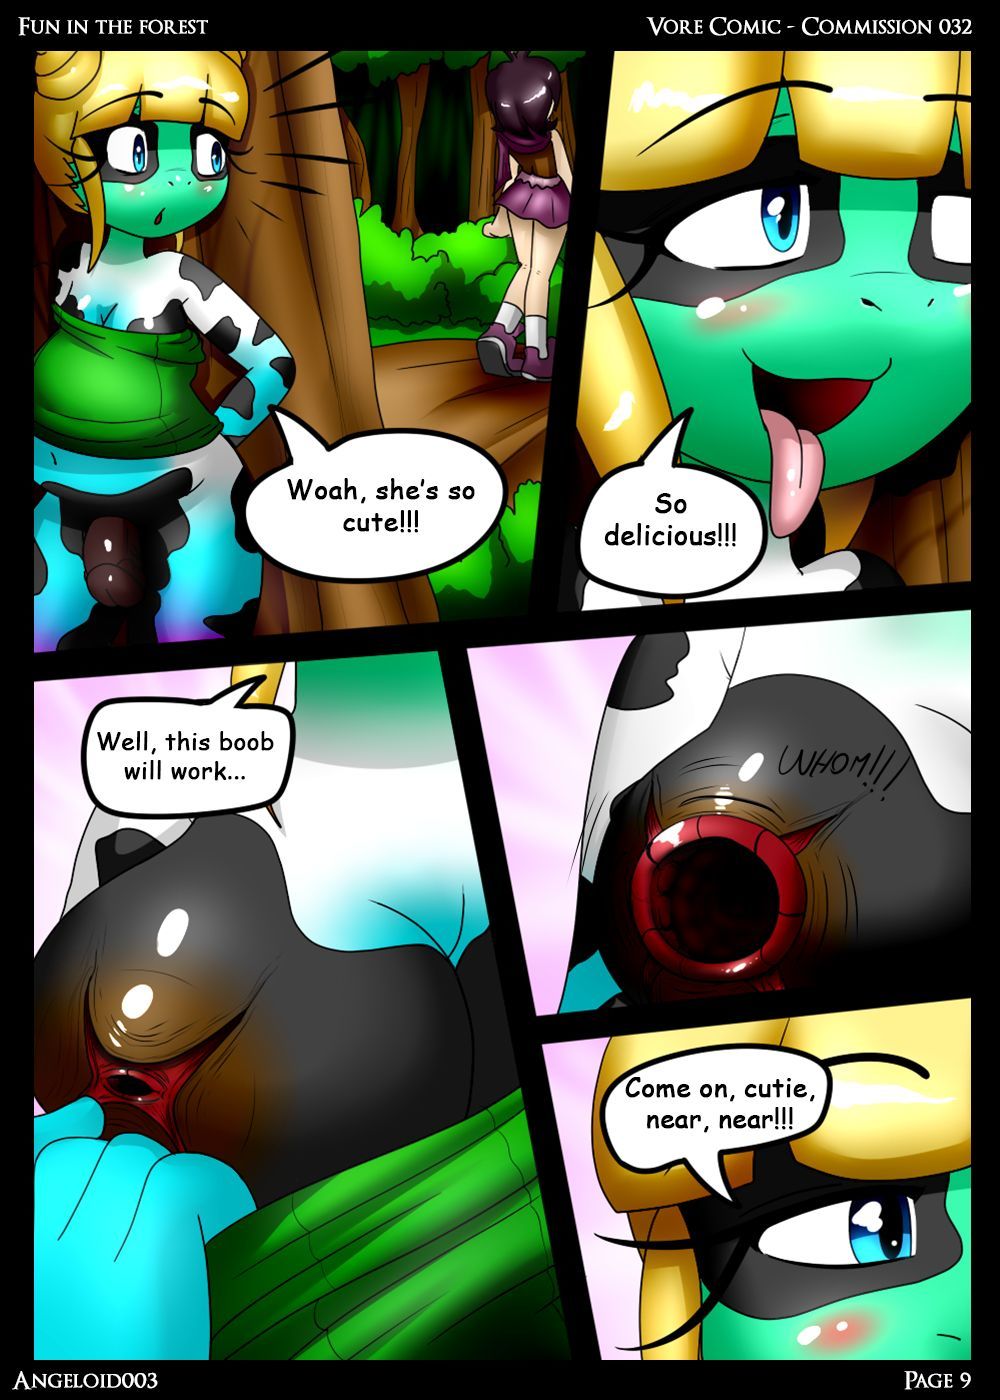 Fun in the Forest - Comm032 Angeloid003 page 9